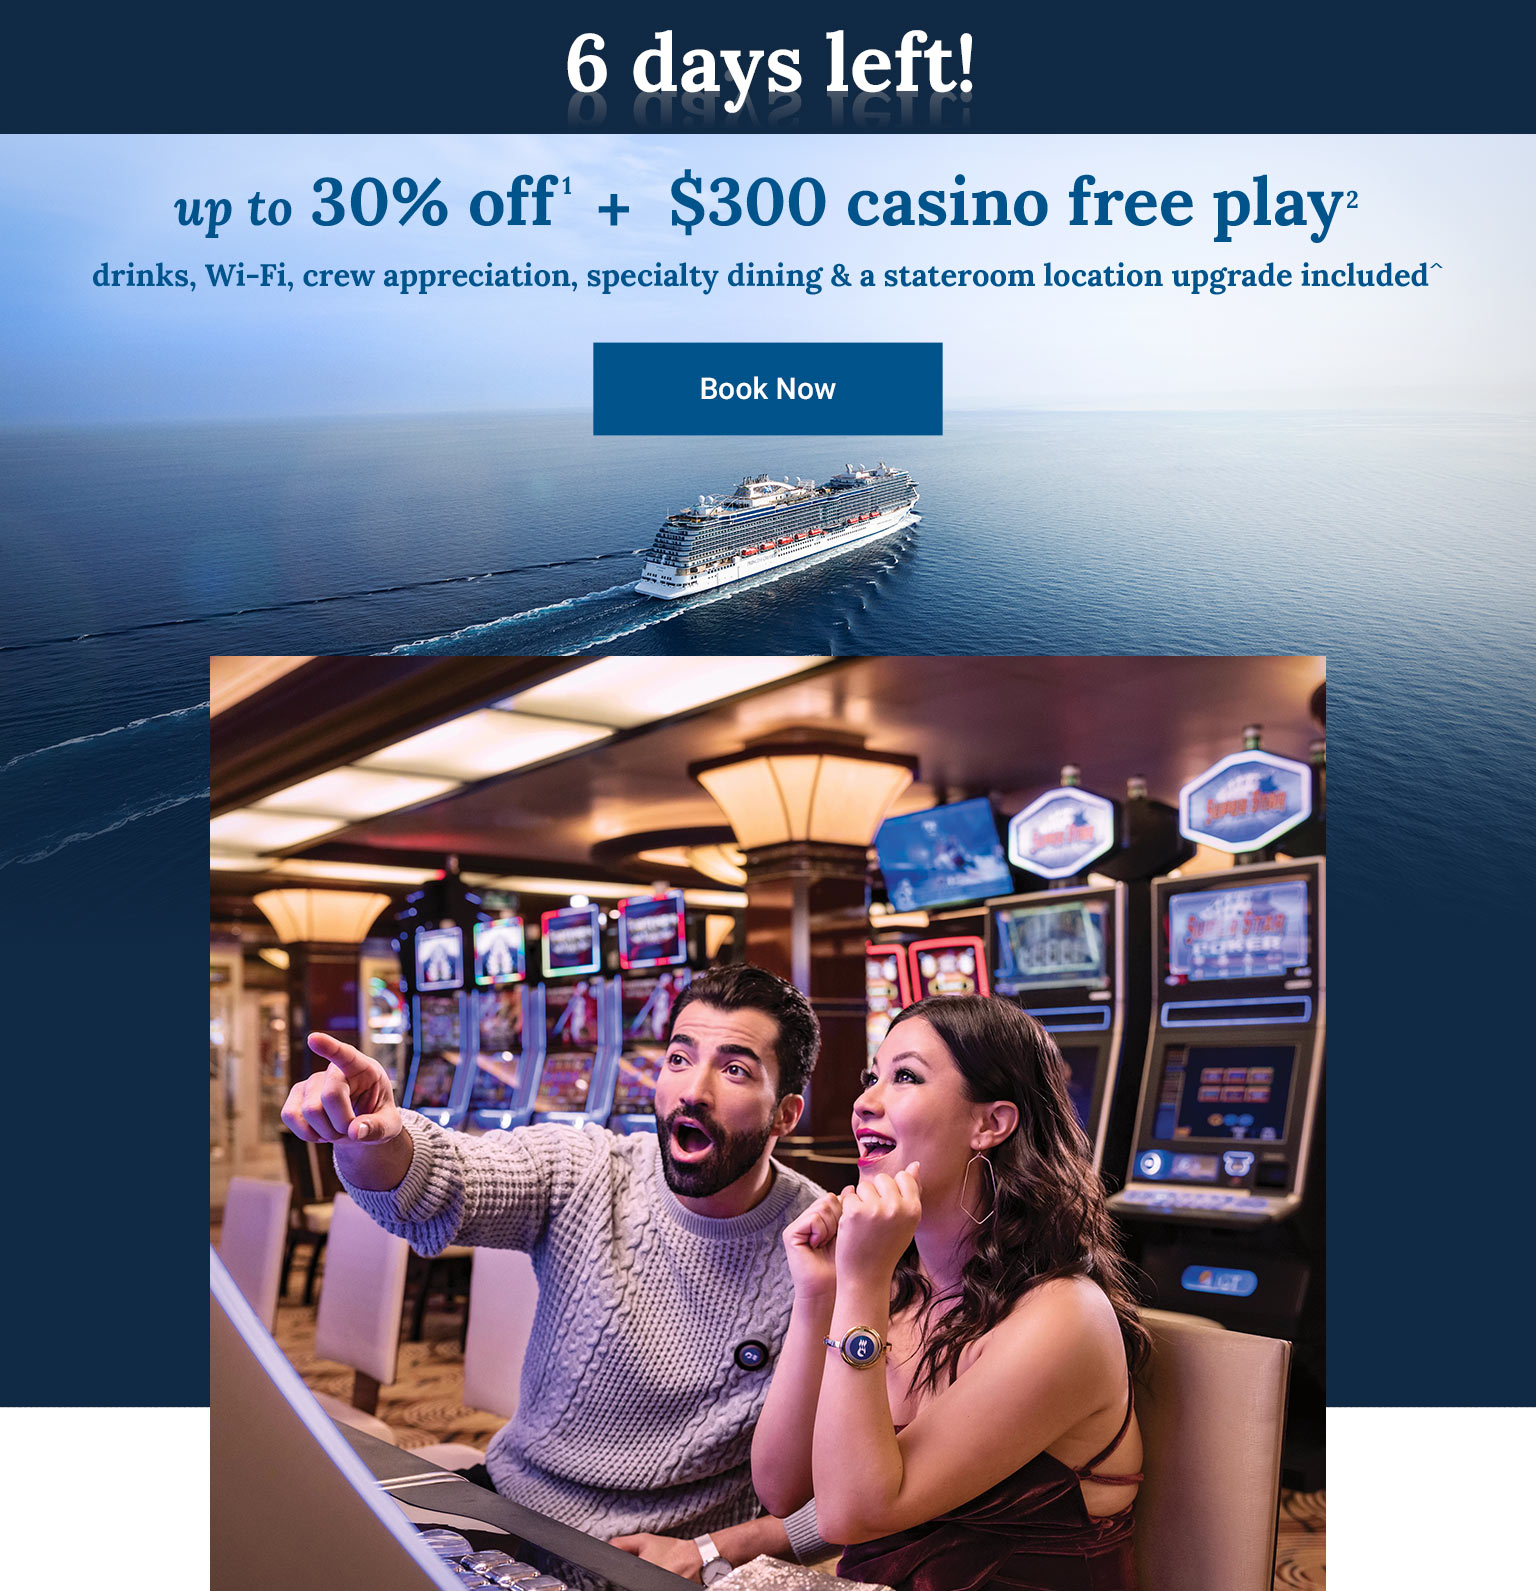 up to 30% off + $300 casino free play + drinks, Wi-Fi, crew appreciation, specialty dining and a stateroom location upgrade included. Click here to book.